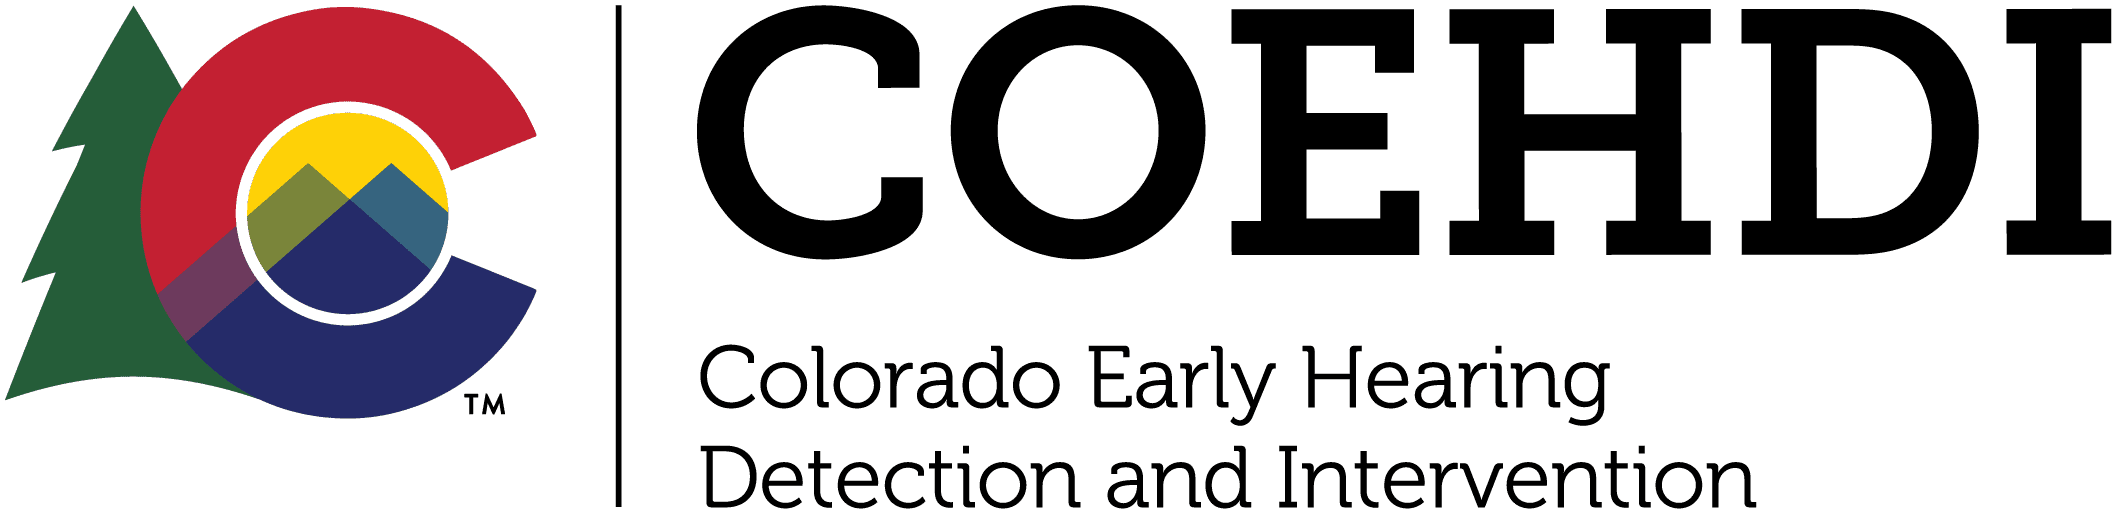 CO EHDI - Colorado Early Hearing Detection & Intervention 